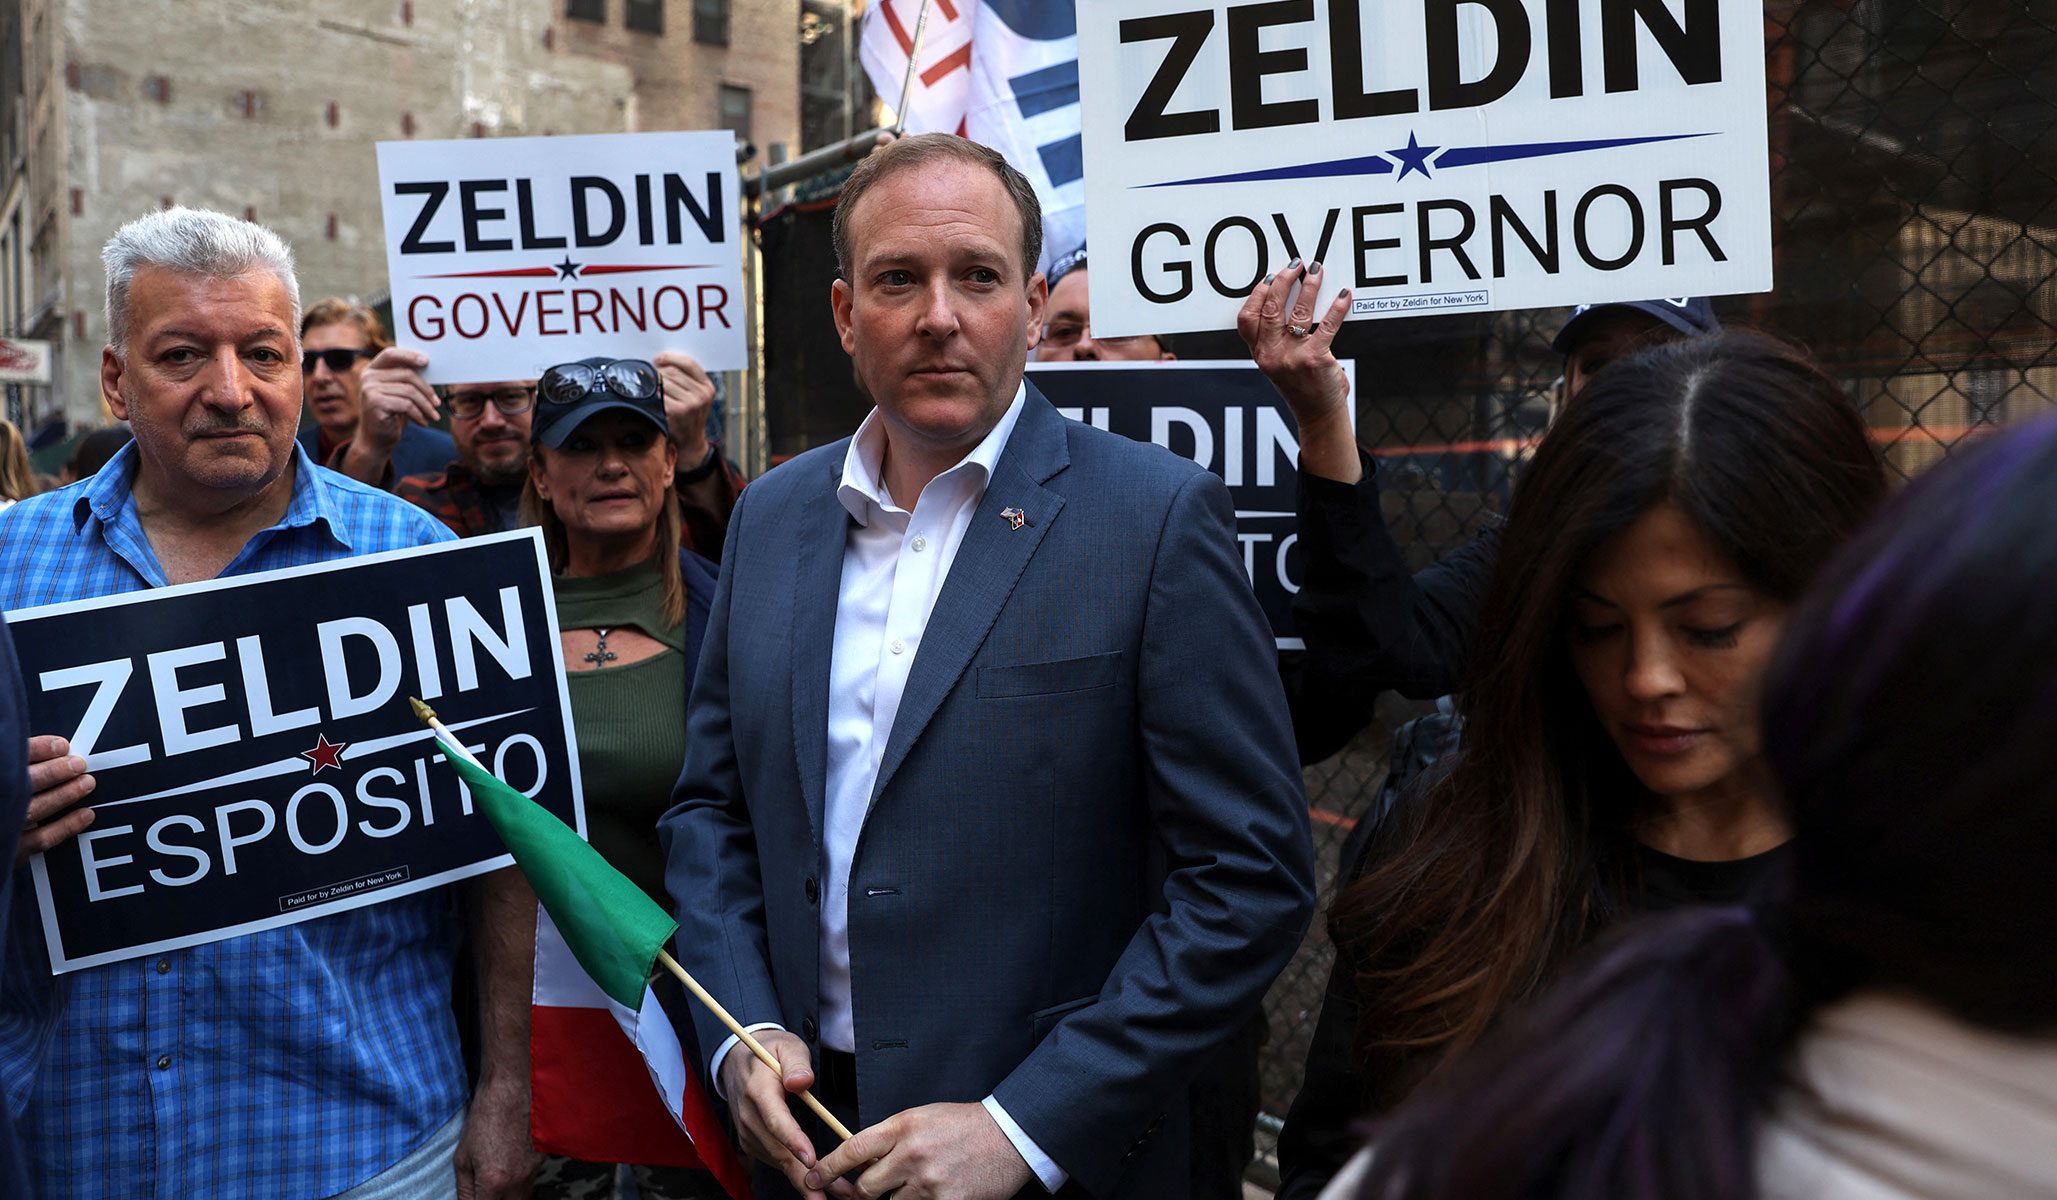 Lee Zeldin Best Choice for New York Governor | National Review